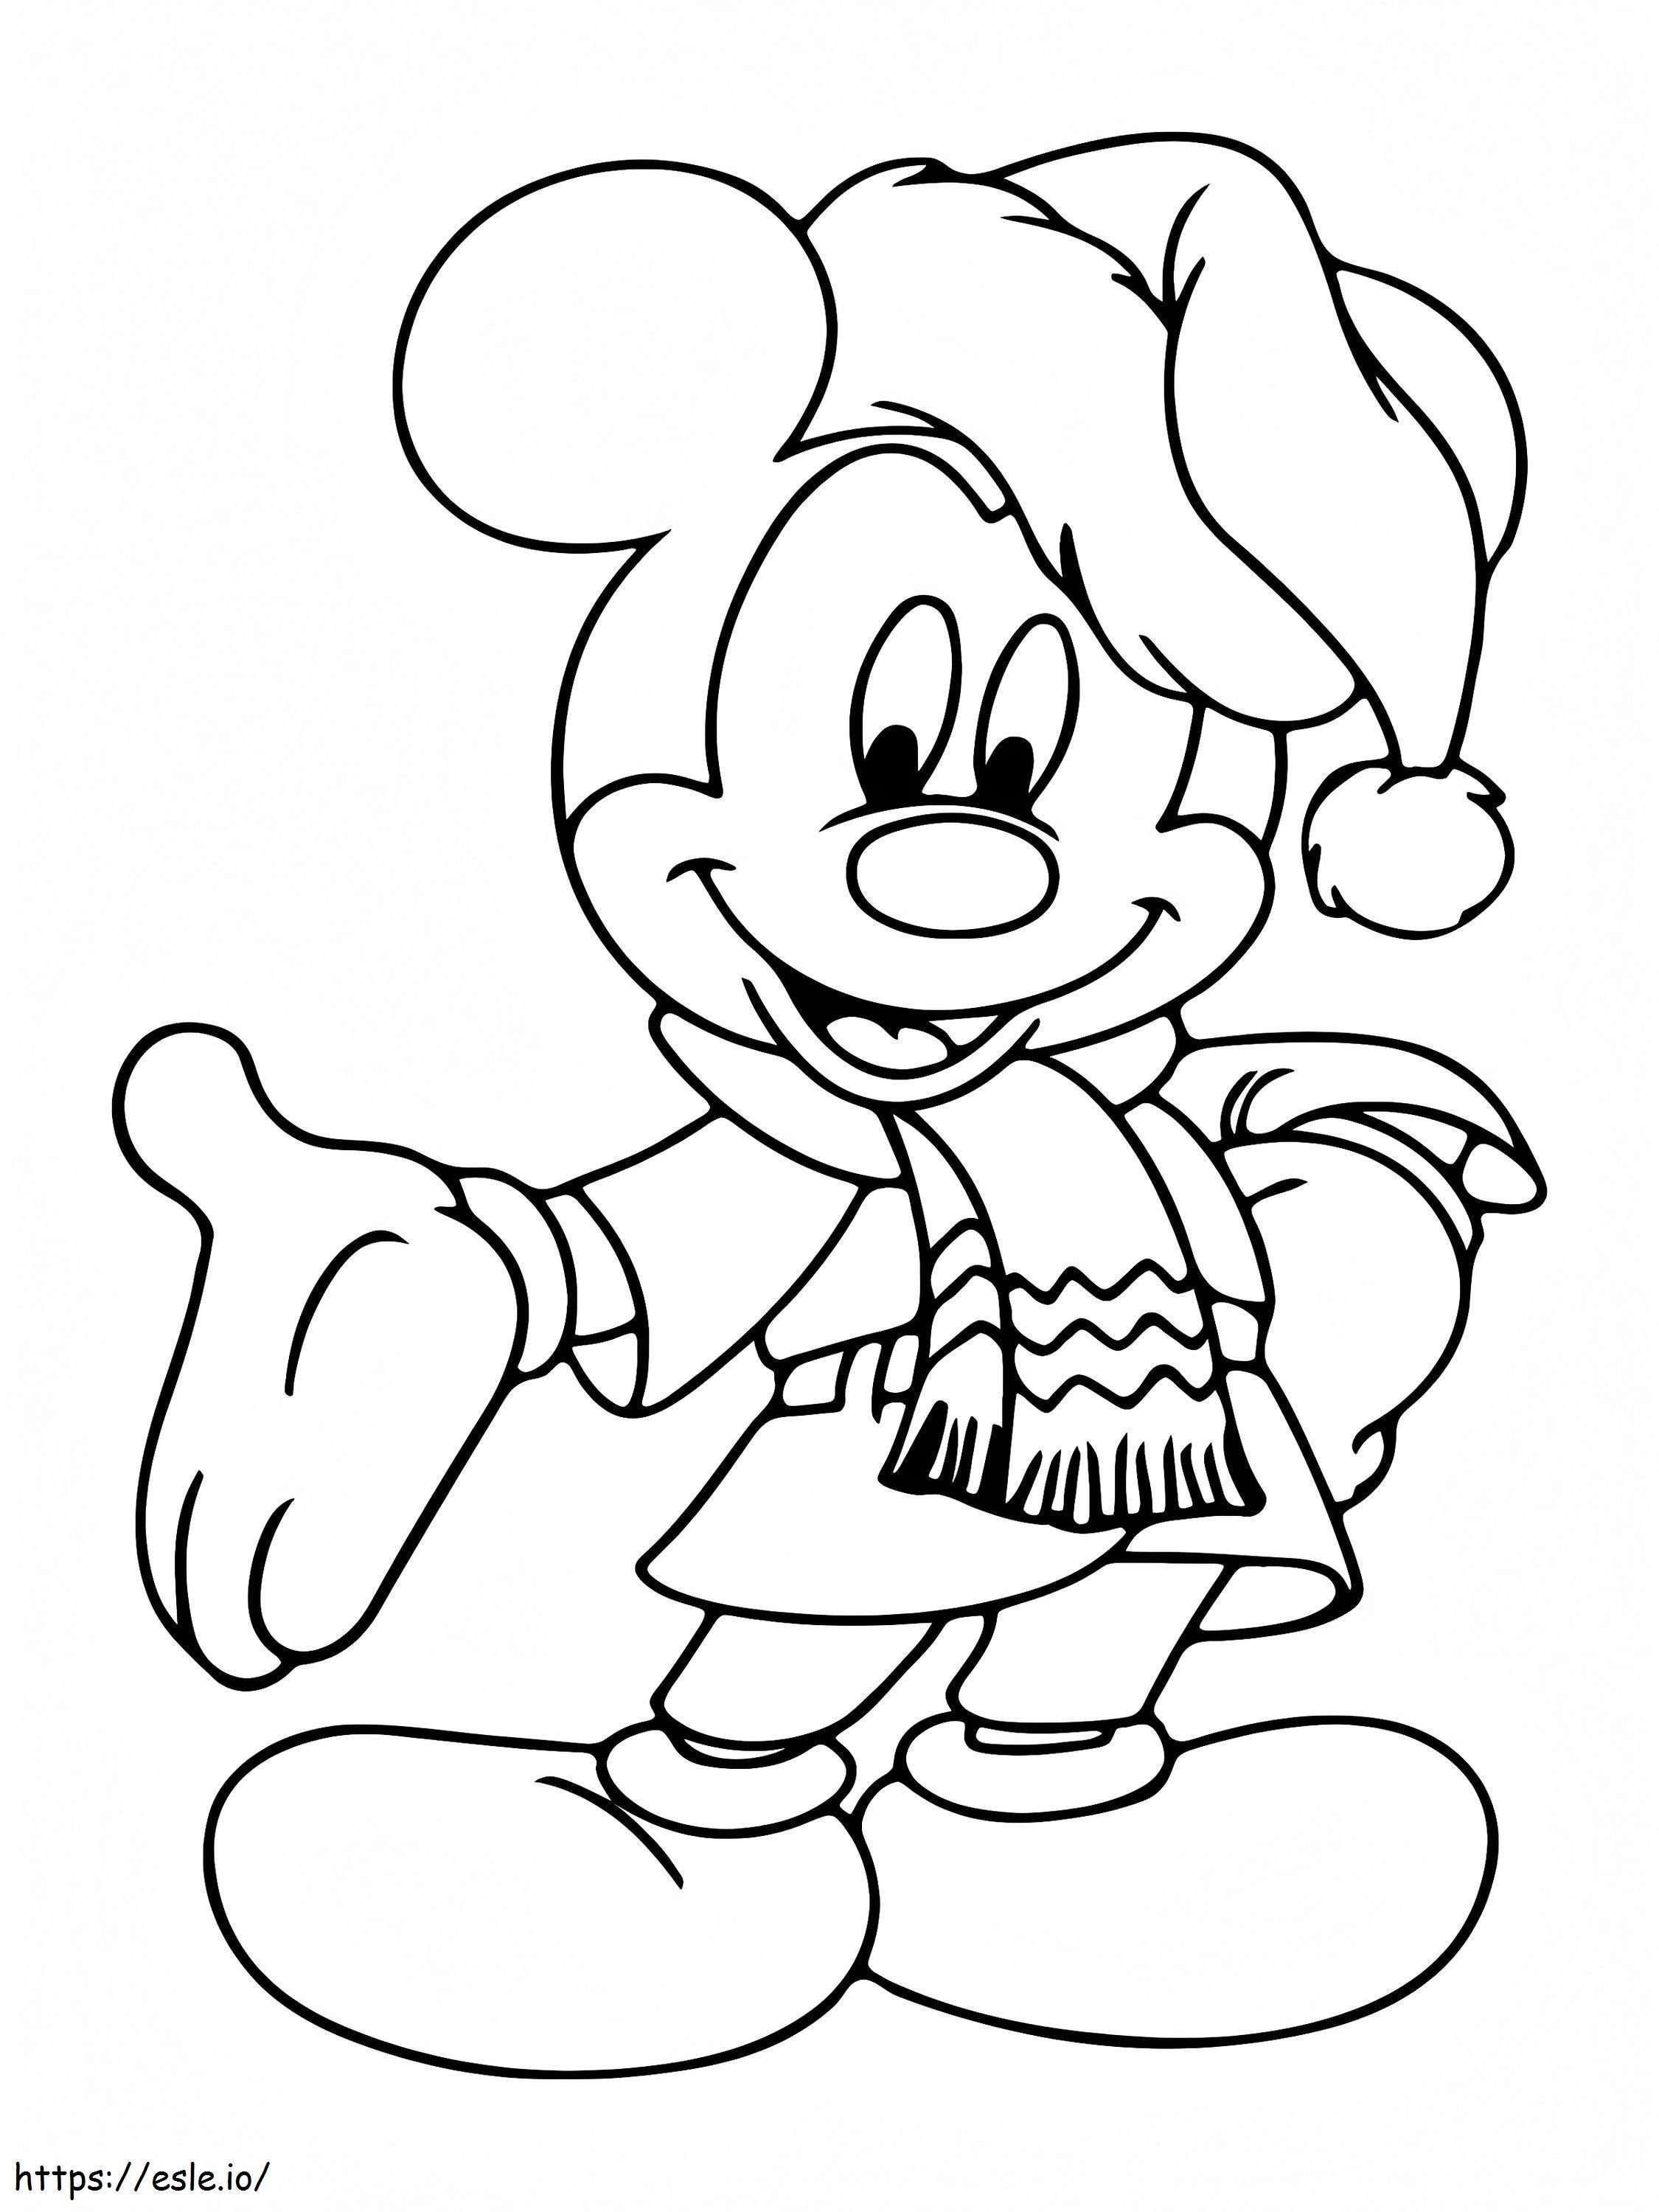 Christmas Disney Coloring 1 coloring page